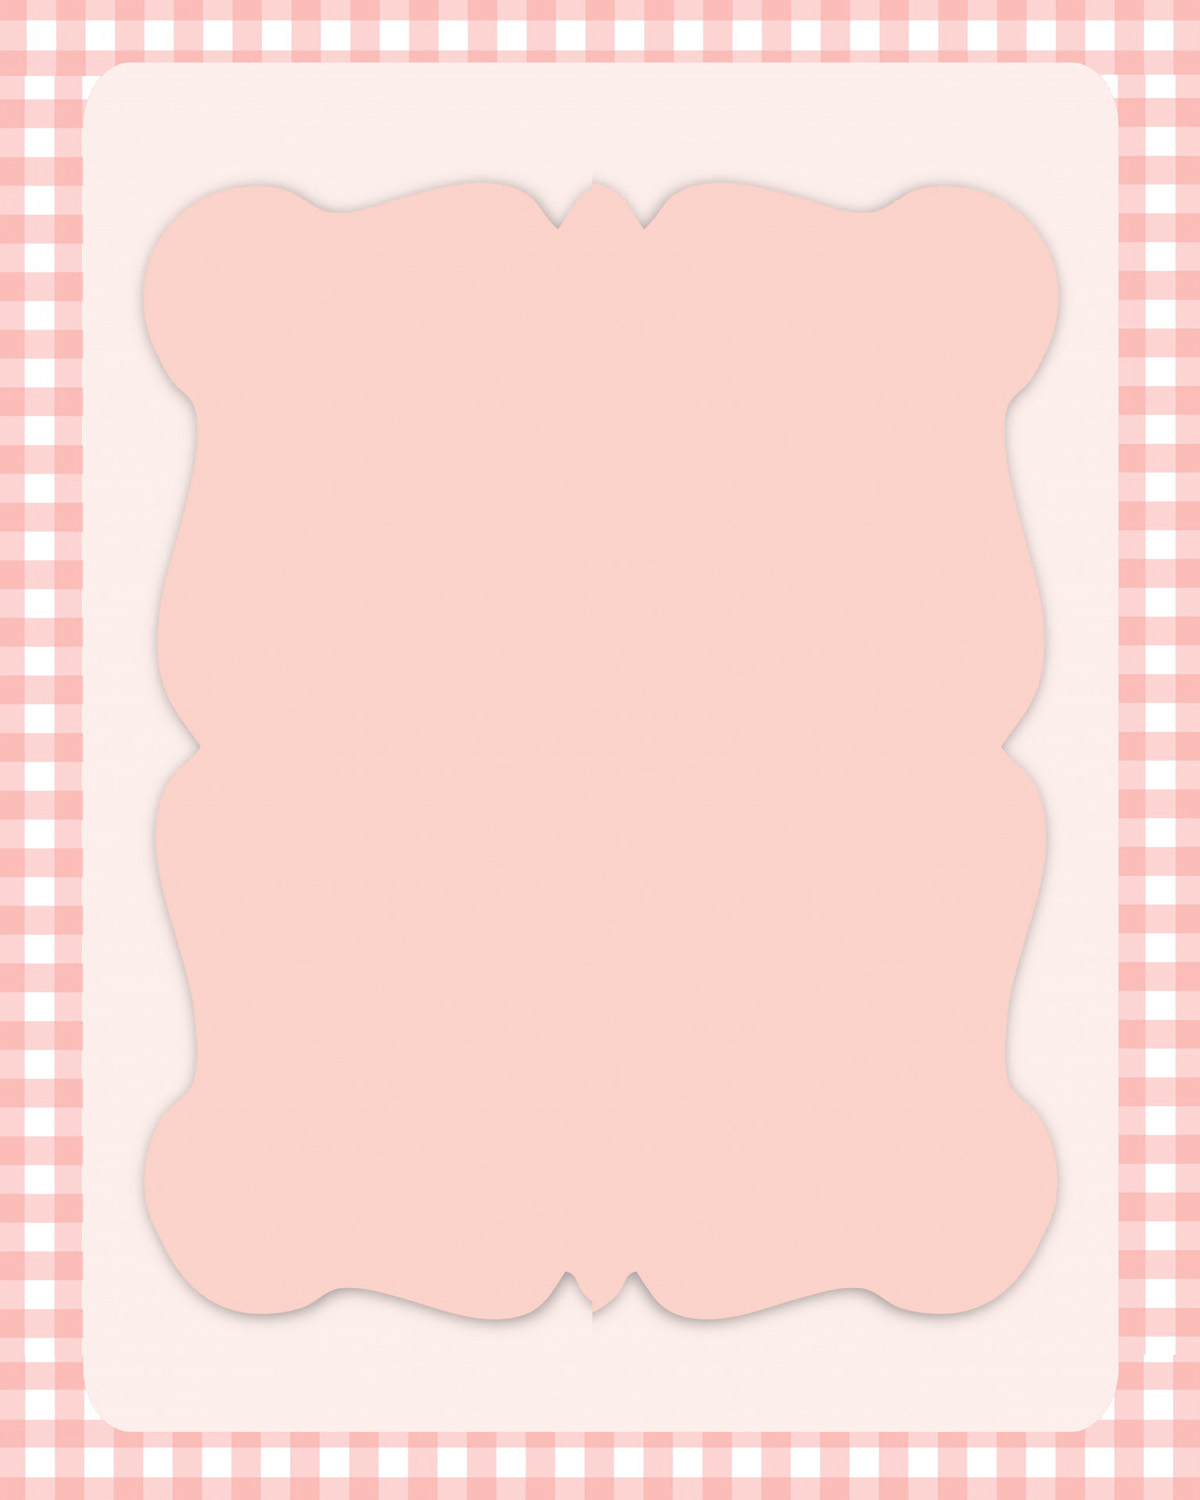 pink frame with checkered border